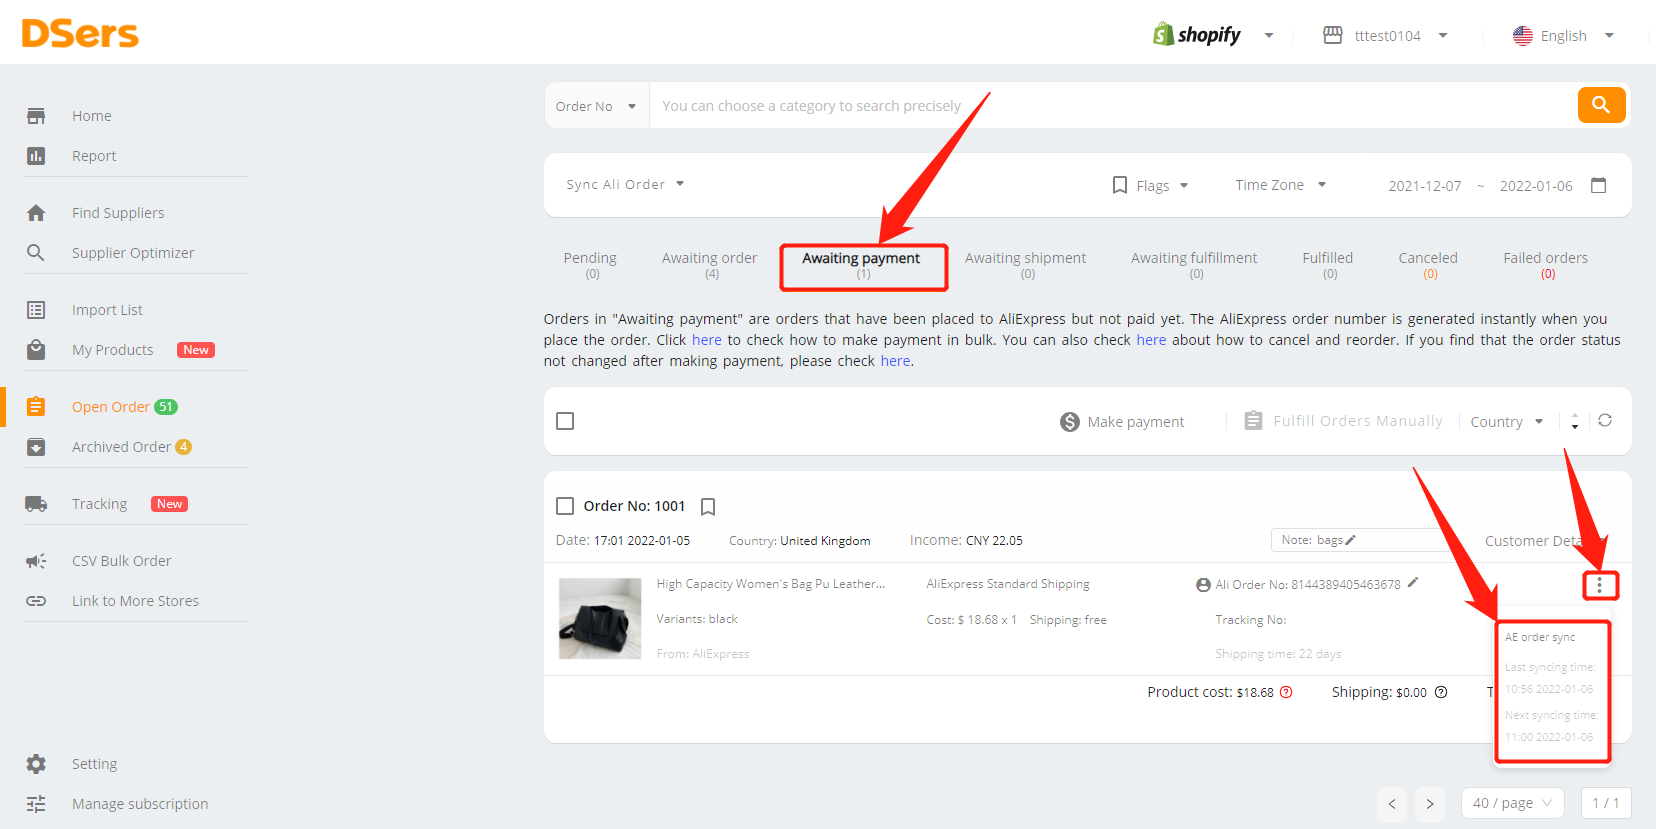 Synchronize AliExpress orders status - timeline - Shopify DSers